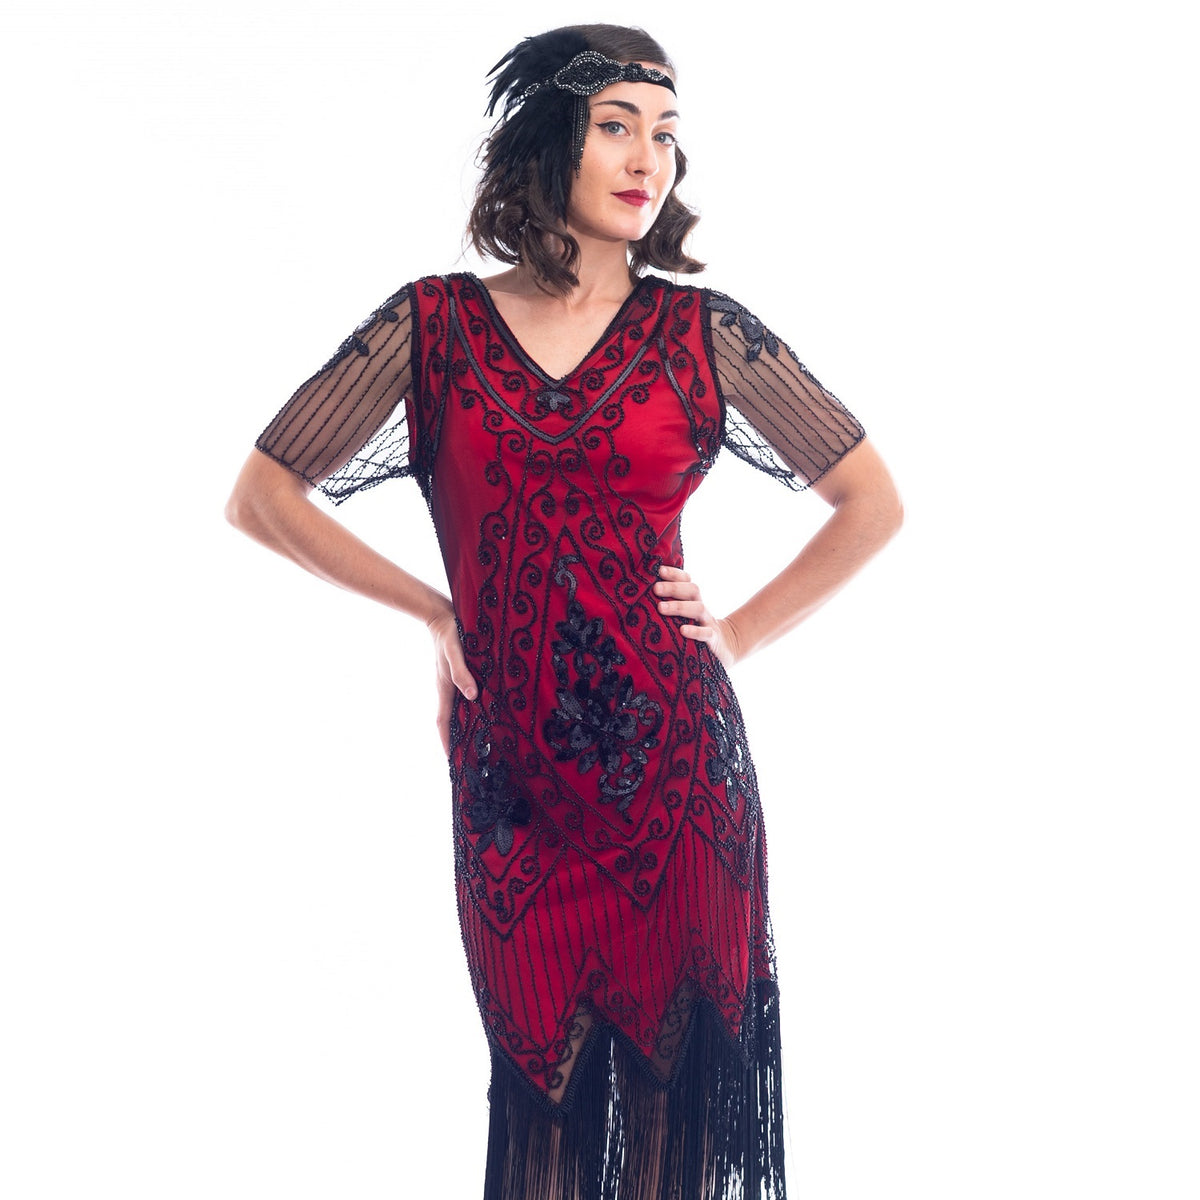 A close view of a burgundy red 1920s Flapper Dress with black beads, sequins, sheer sleeves and black fringes